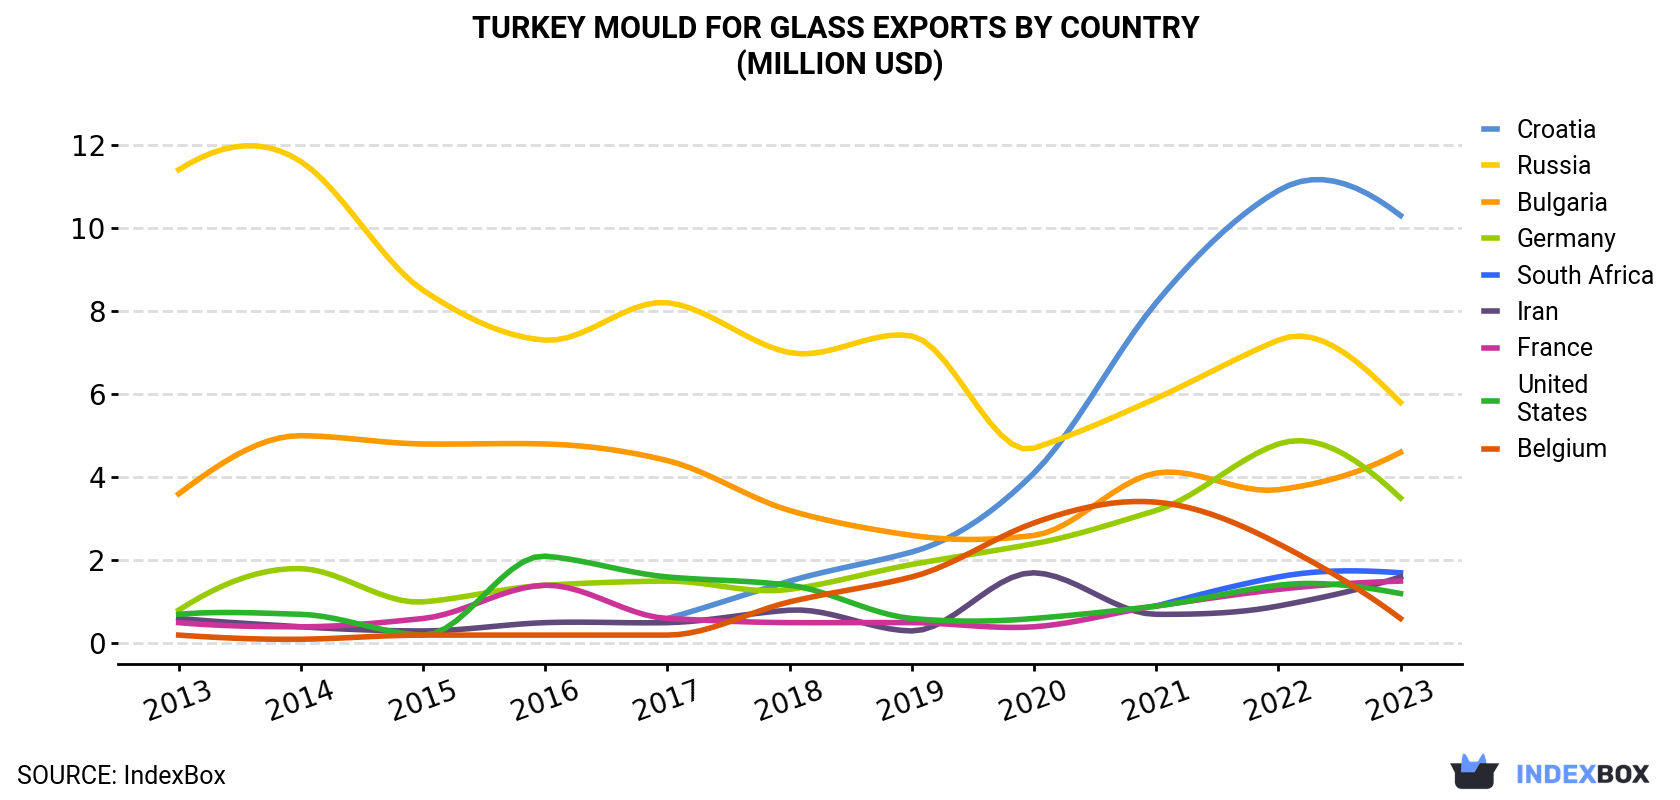 Turkey Mould For Glass Exports By Country (Million USD)